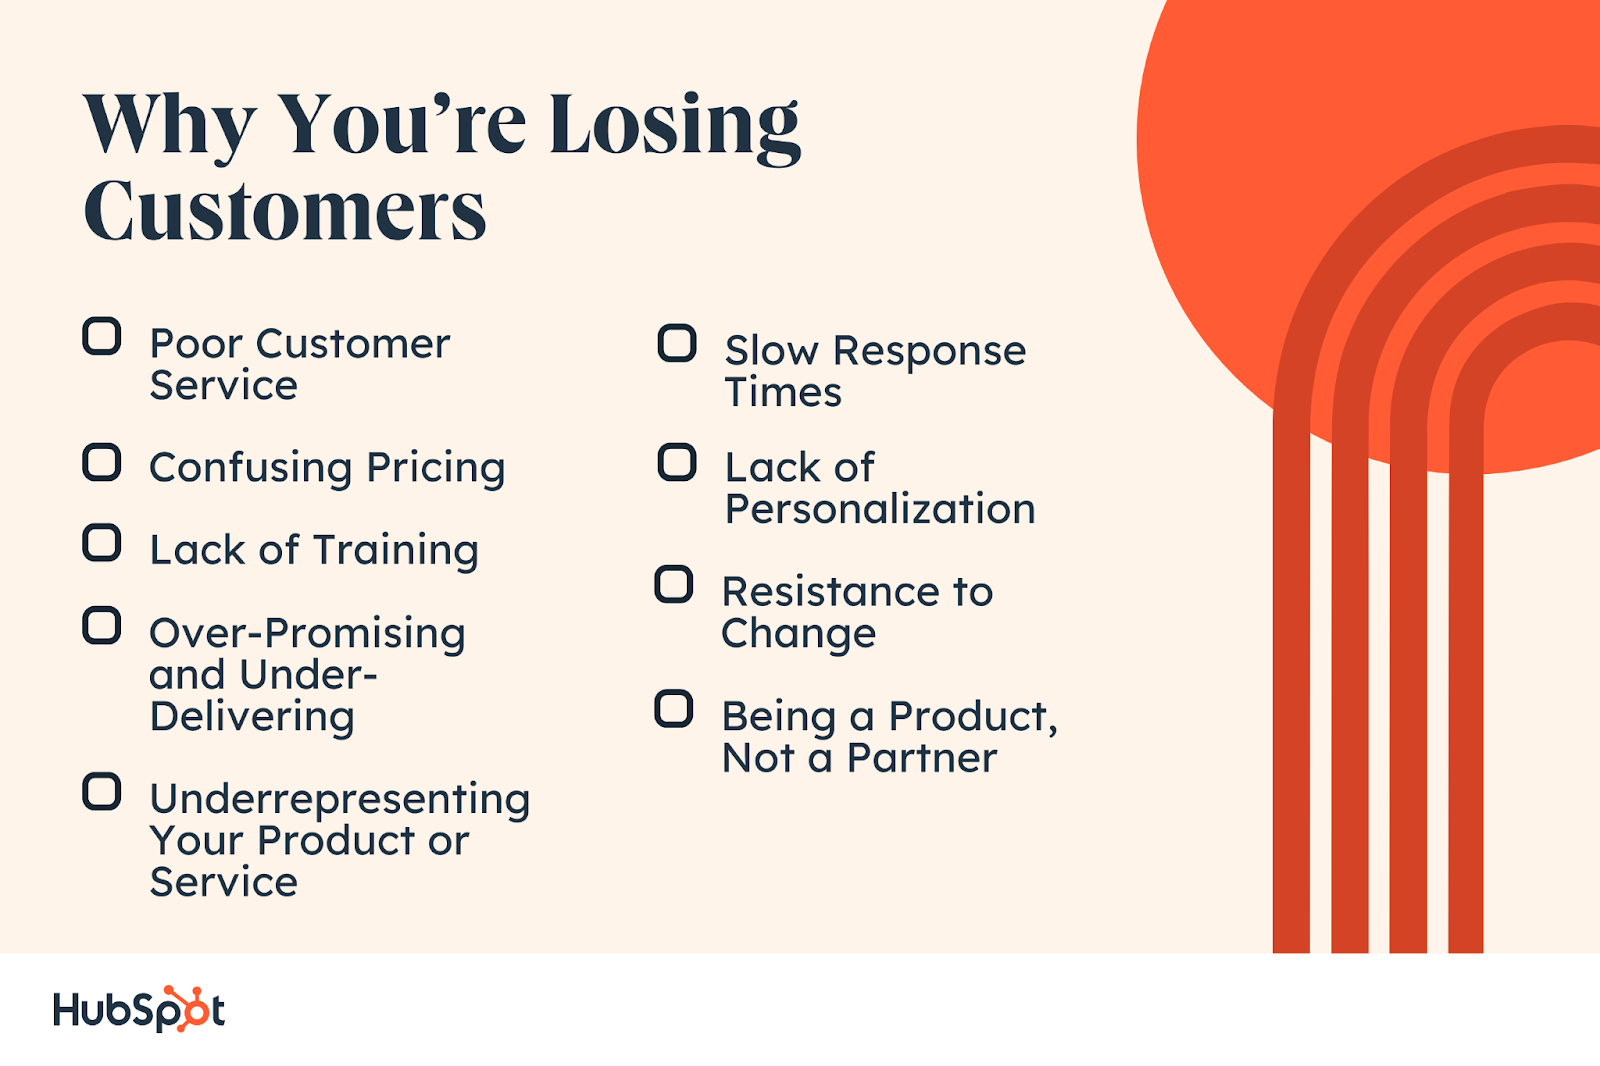 How to Turn Your Strategy Around. Analyze customer behavior. Propose solutions and offer support. Quickly respond to customers. Ensure your team is on the same page. Treat all customers as a priority.